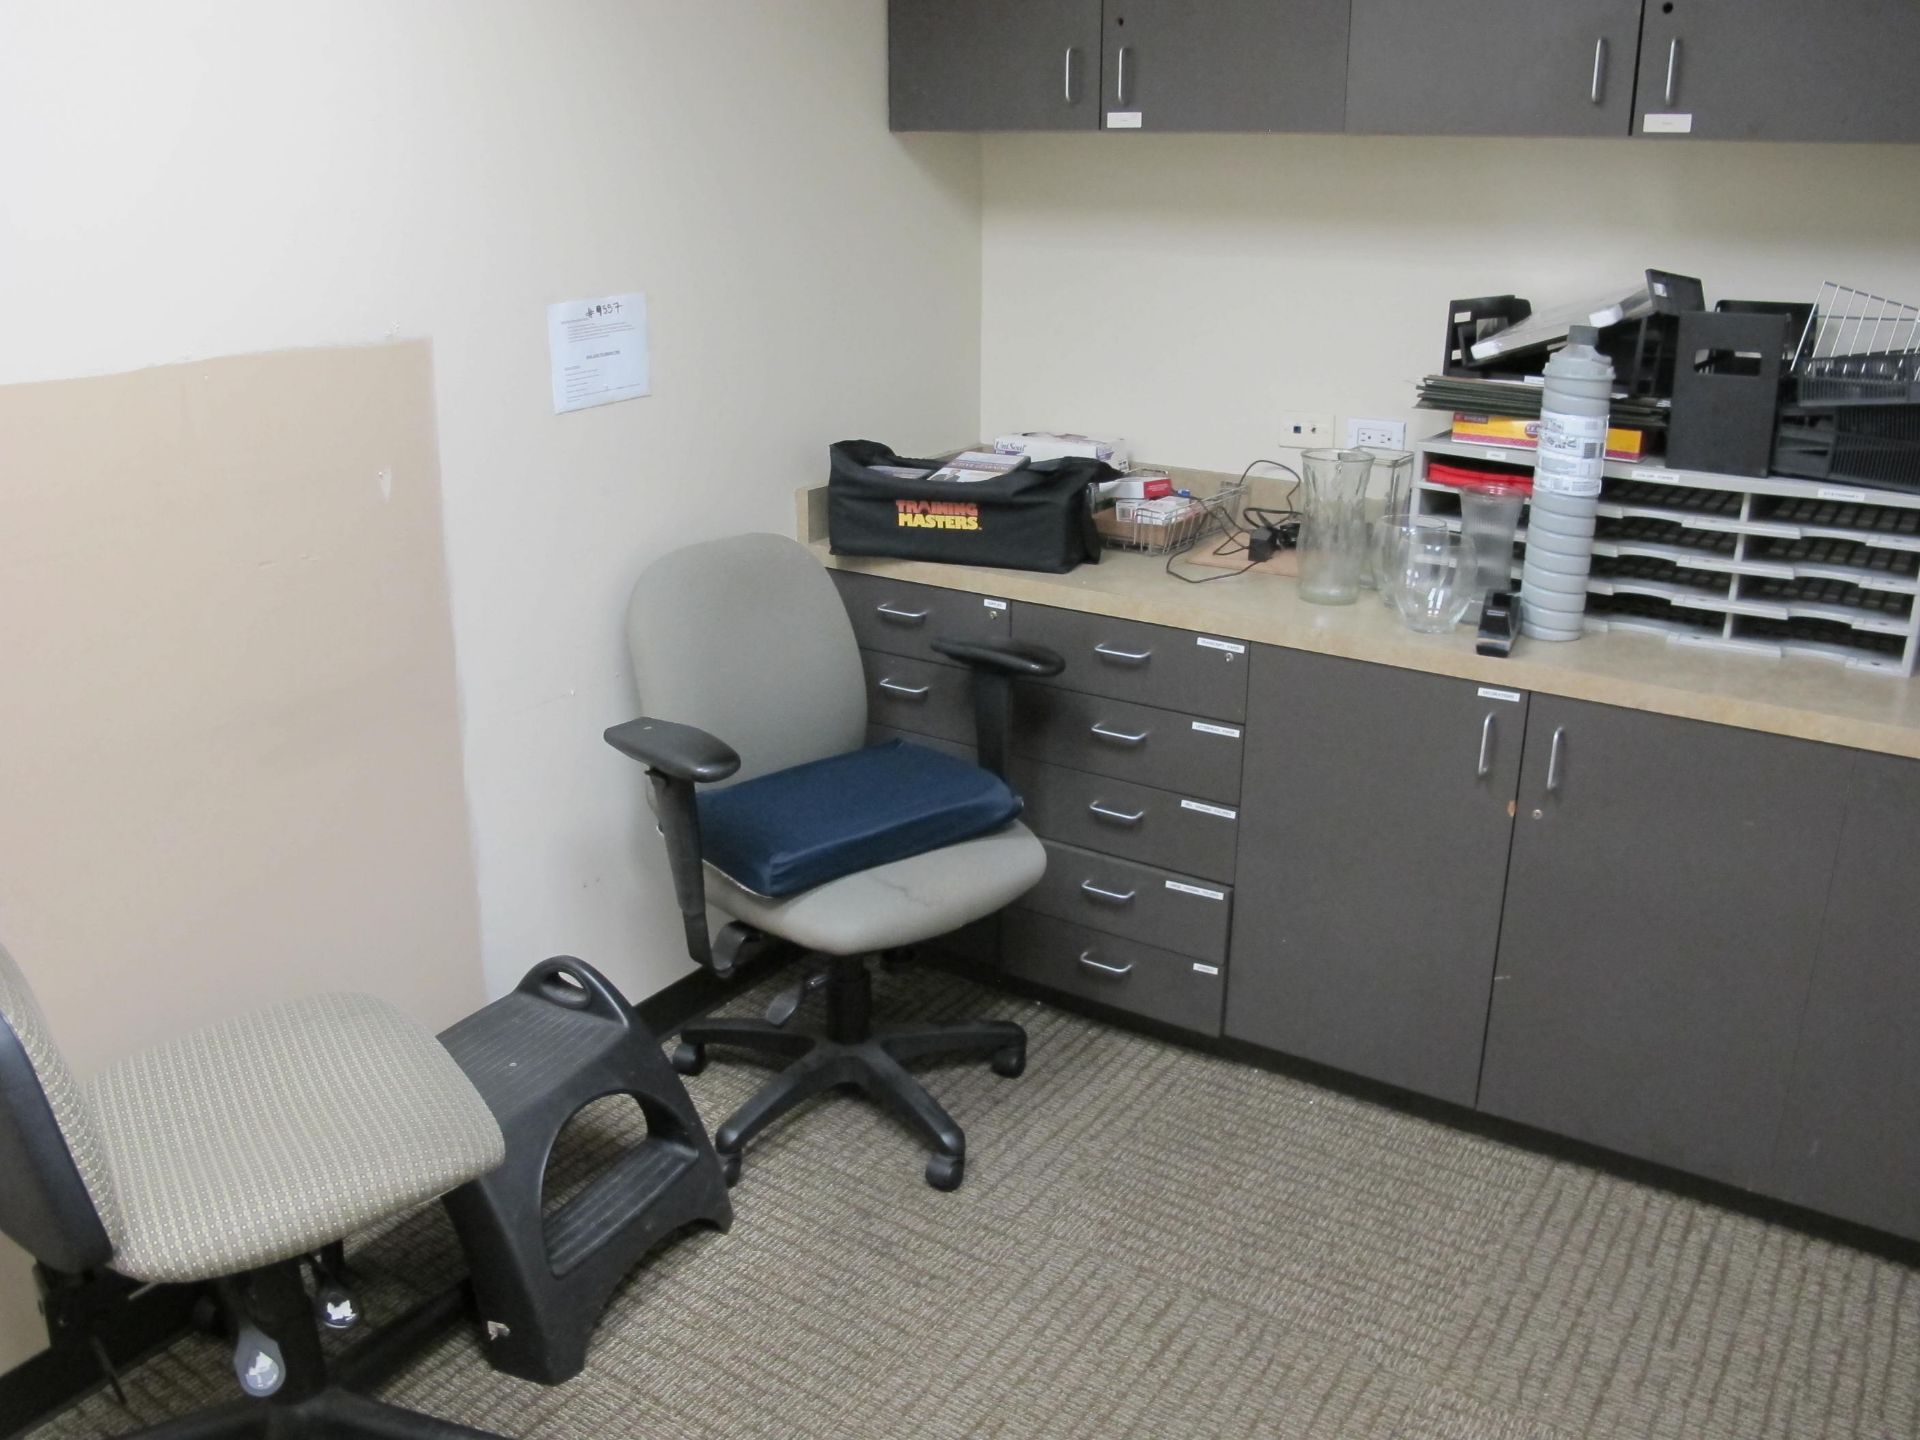 Contents of Room (including Mail Cubbies, Paper Organizers, Training Masters Active Learing